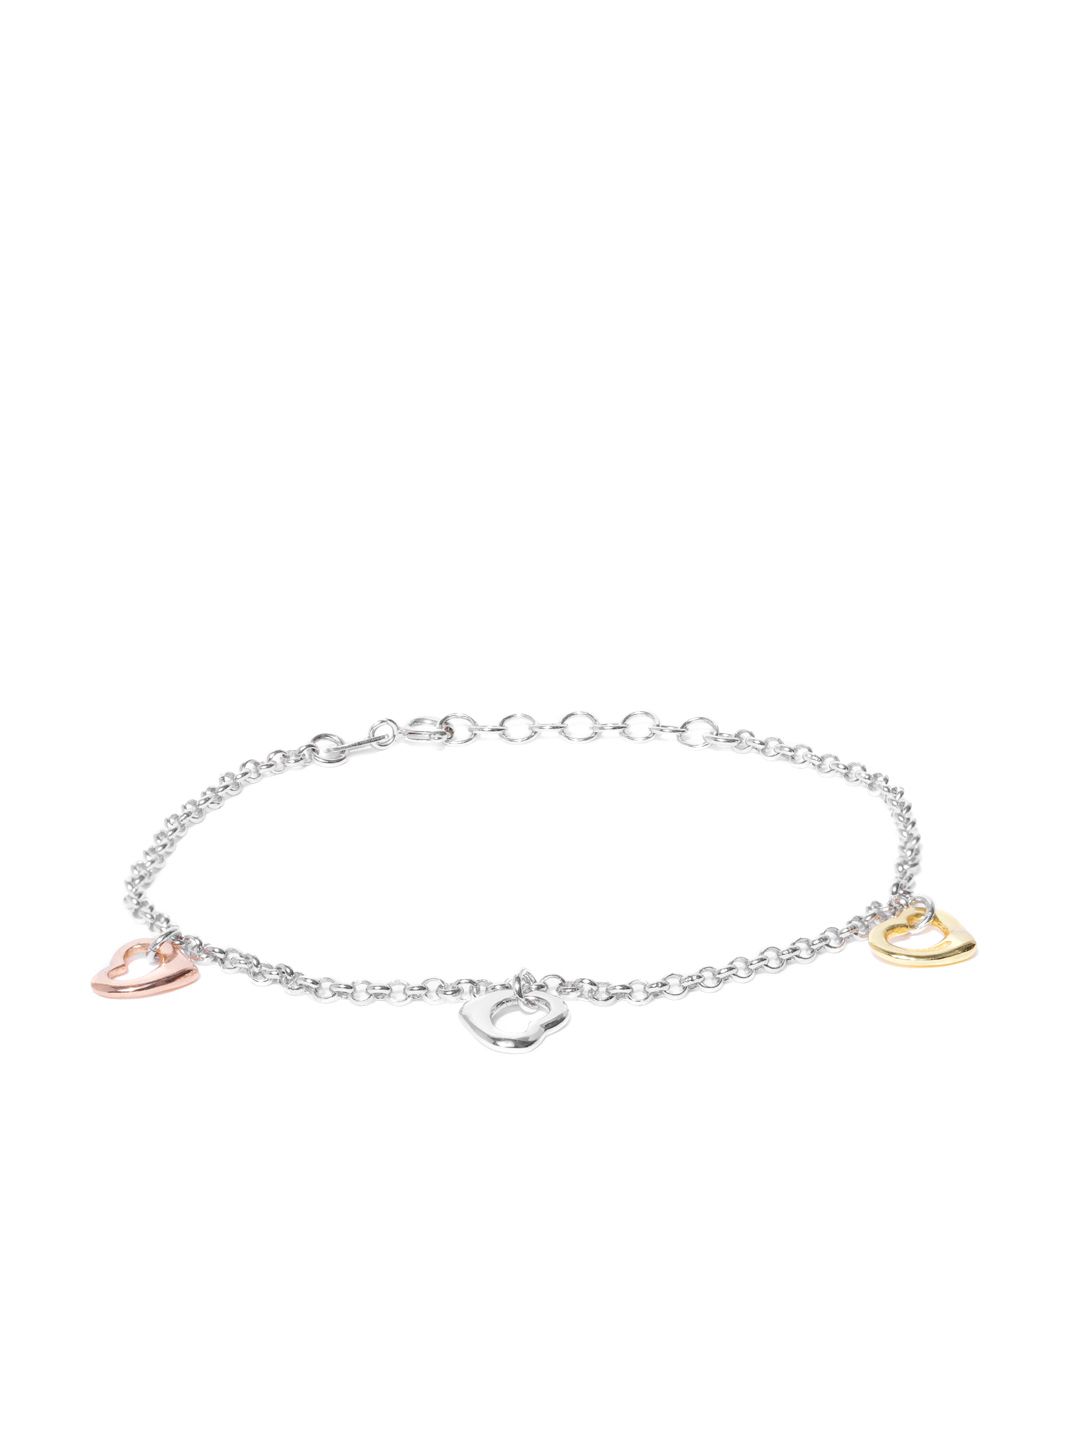 Carlton London Silver-Toned & Gold-Toned Rhodium-Plated Heart-Shaped Charm Bracelet Price in India